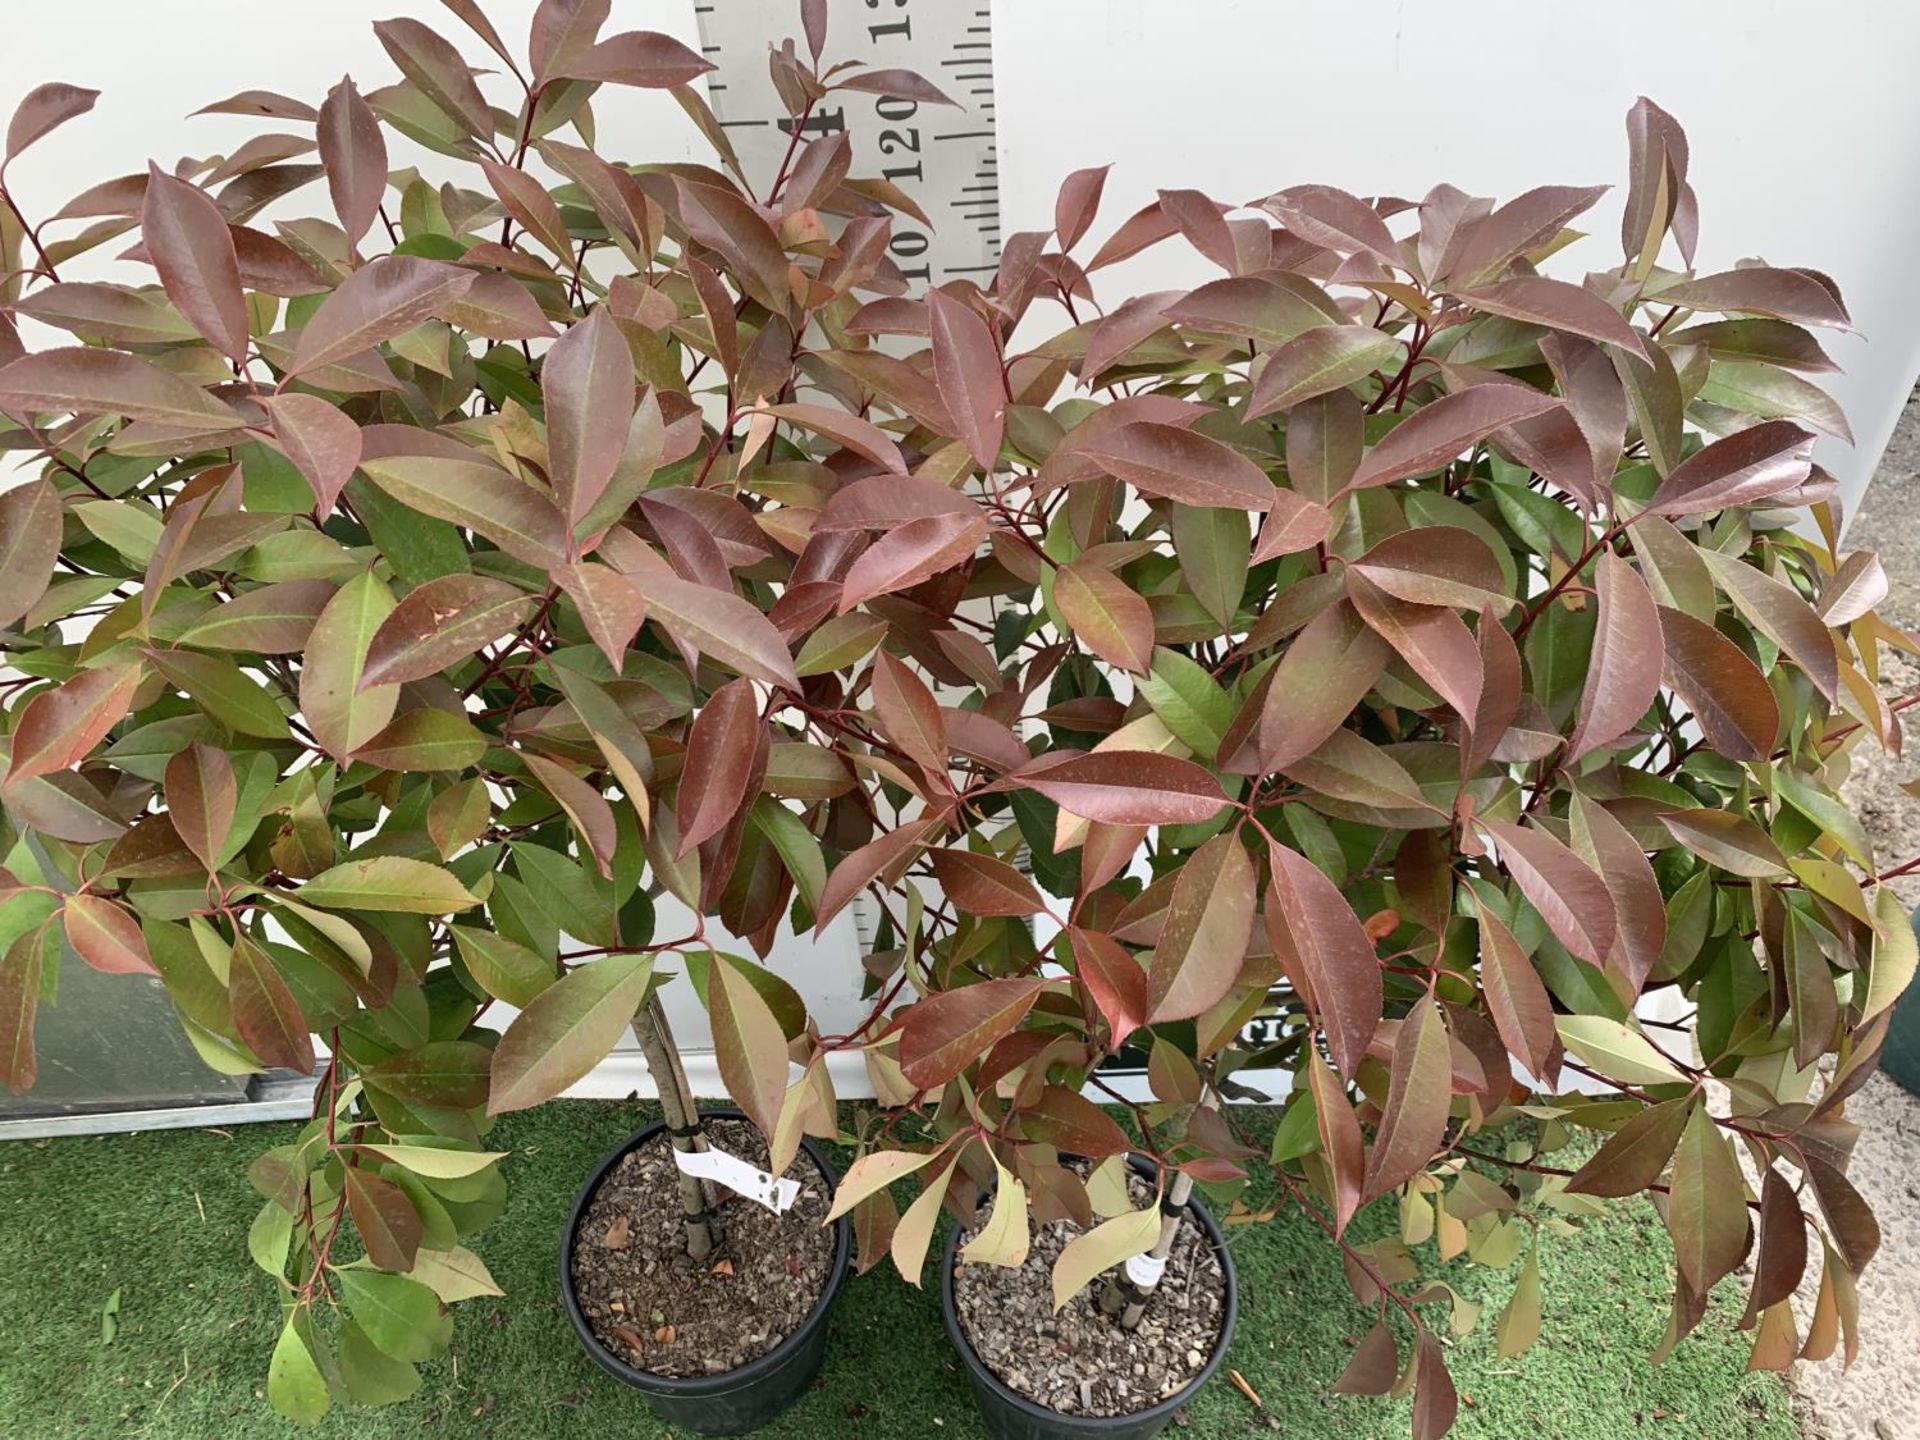 A PAIR OF STANDARD PHOTINIA FRASERI RED ROBIN TREES 140CM TALL IN A 10 LTR POT TO BE SOLD FOR THE - Image 3 of 8